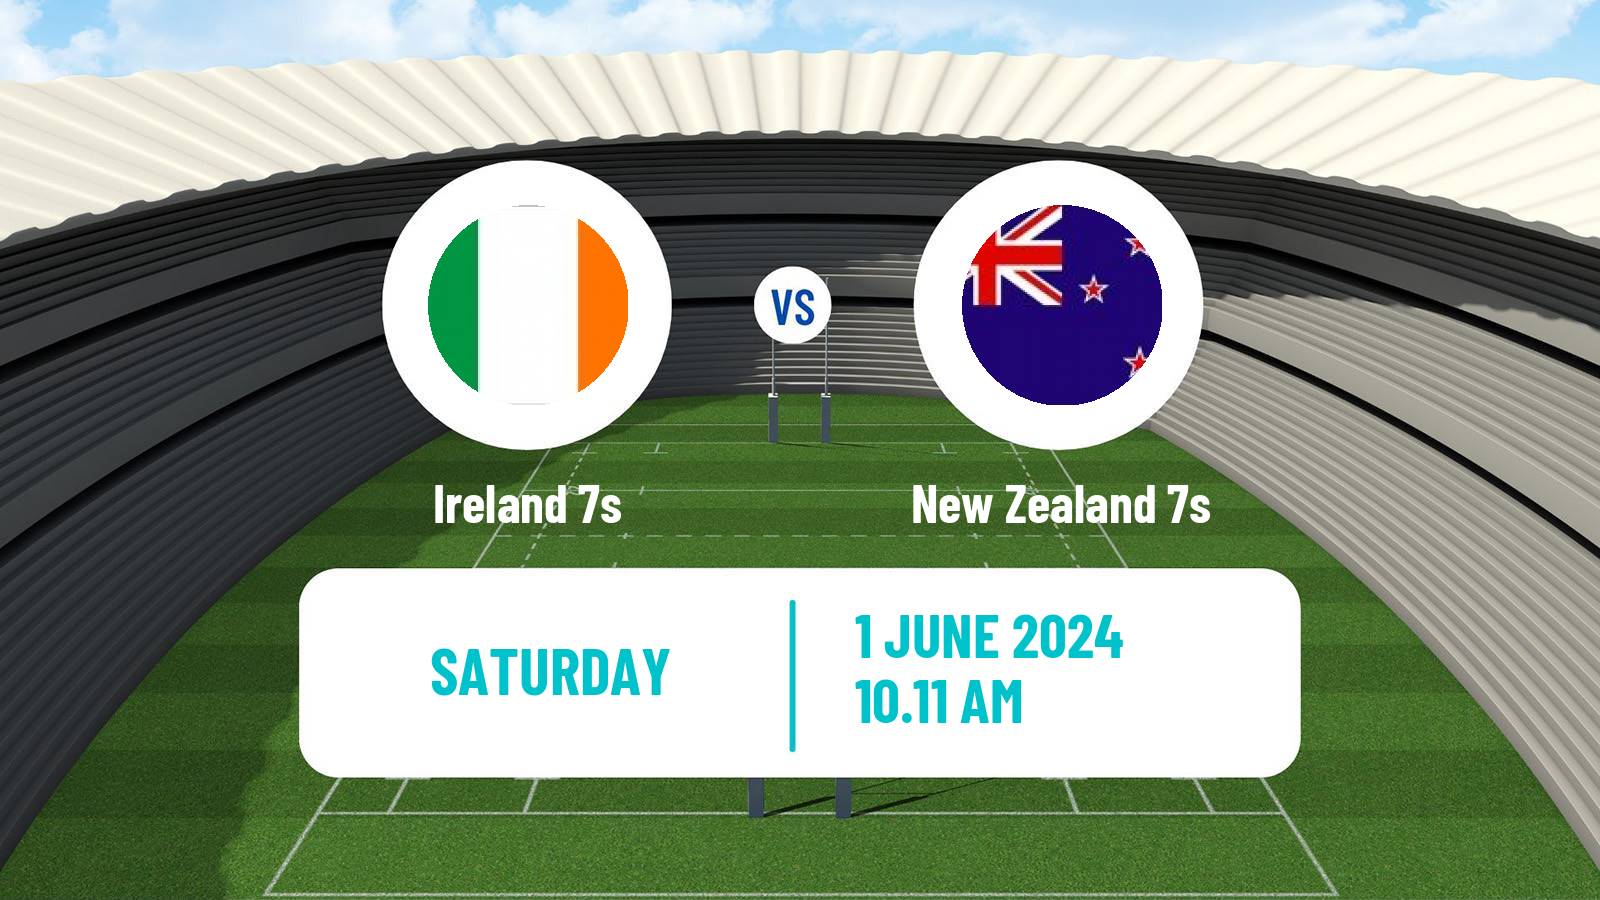 Rugby union Sevens World Series - Spain Ireland 7s - New Zealand 7s